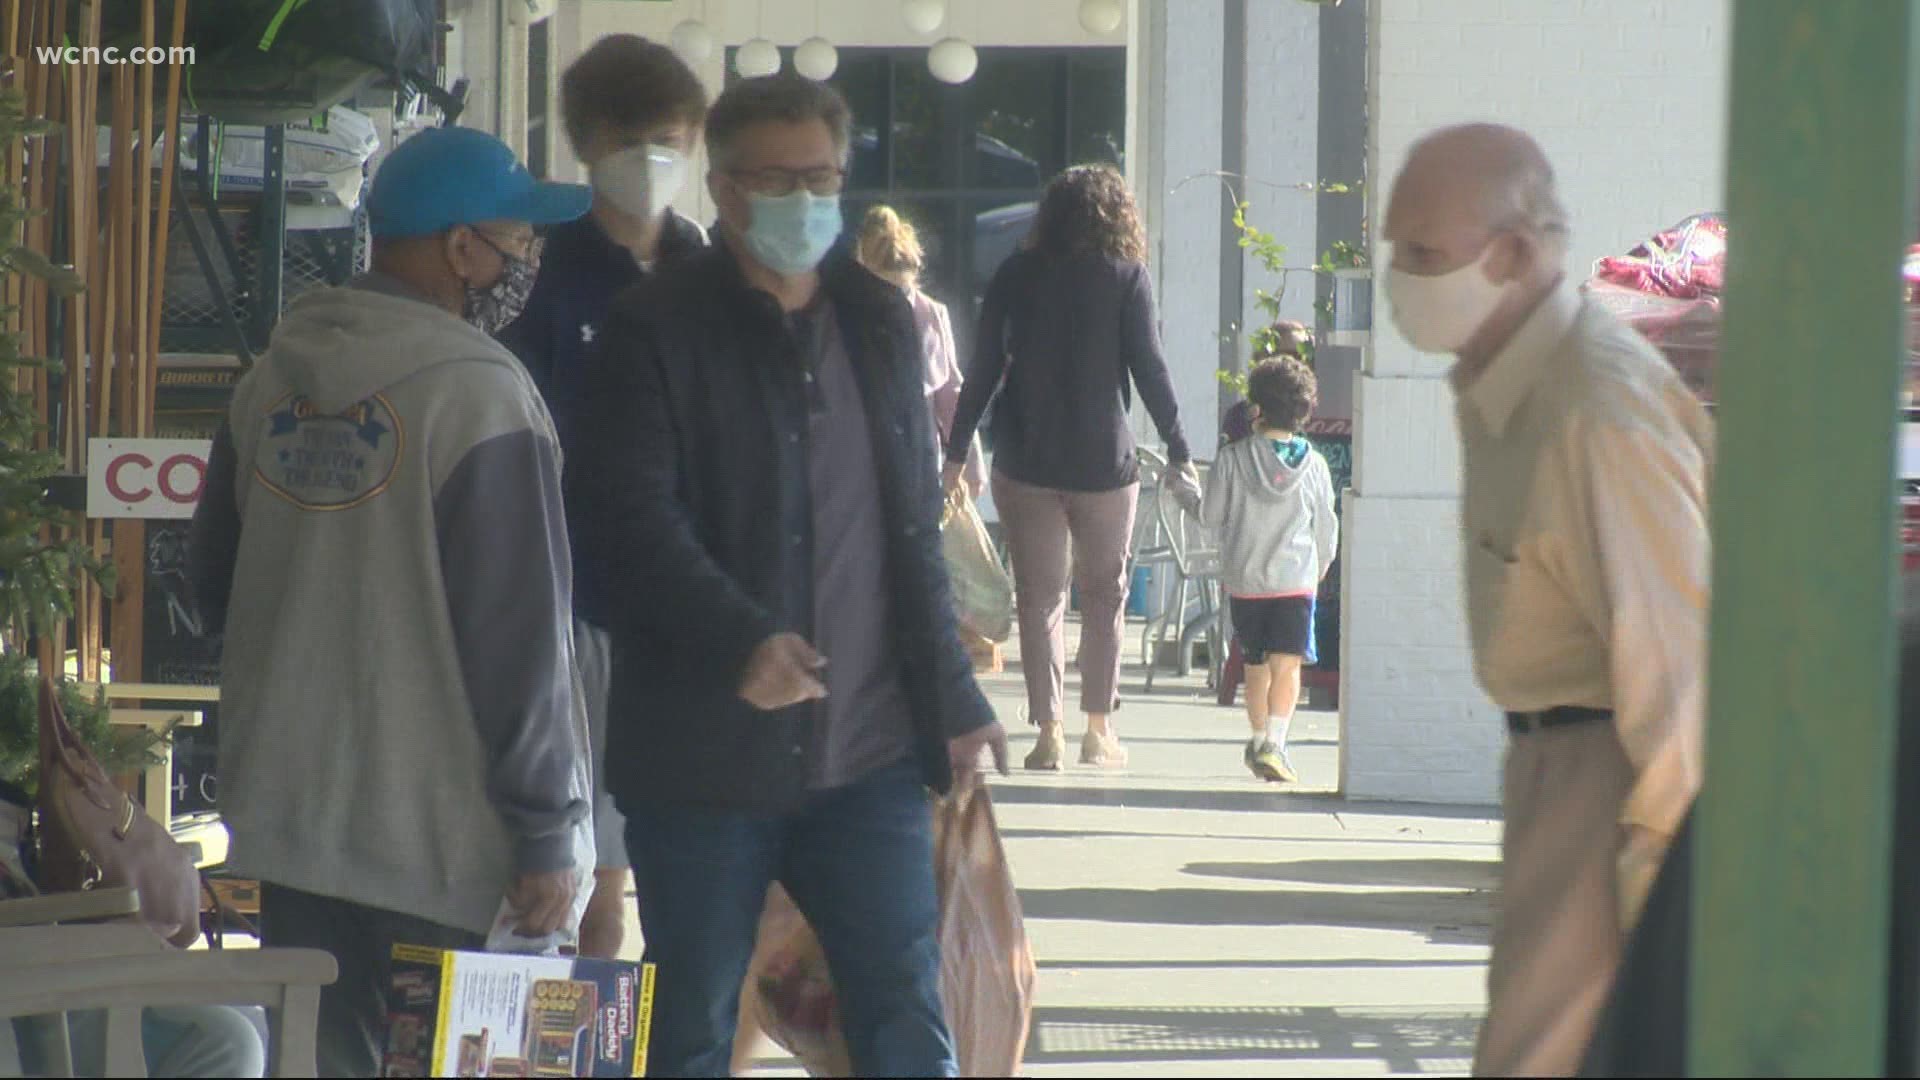 Many stores have also offered online deals or curbside pickup to help people feel safer amid the COVID-19 pandemic.